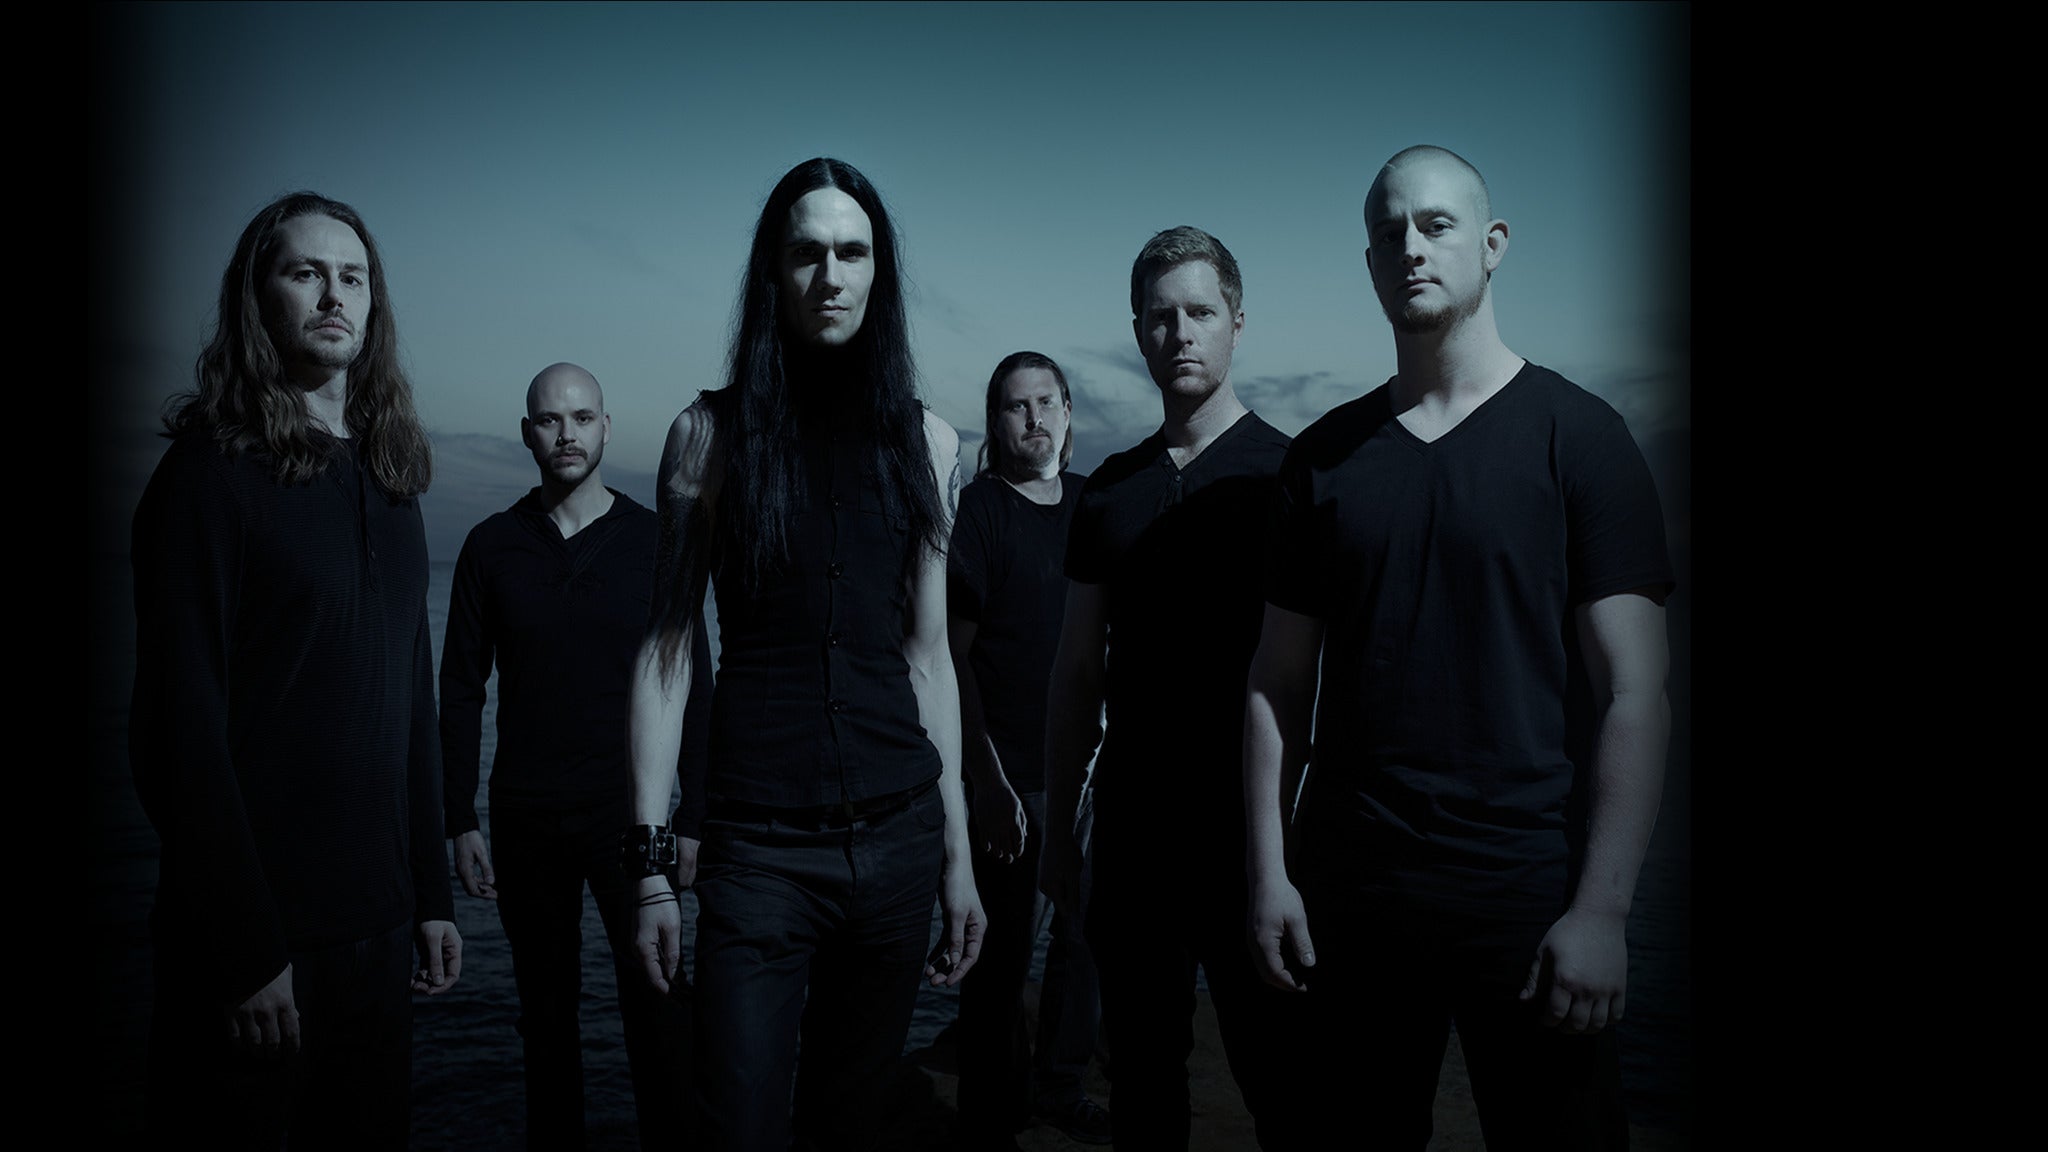 Image used with permission from Ticketmaster | Ne Obliviscaris tickets